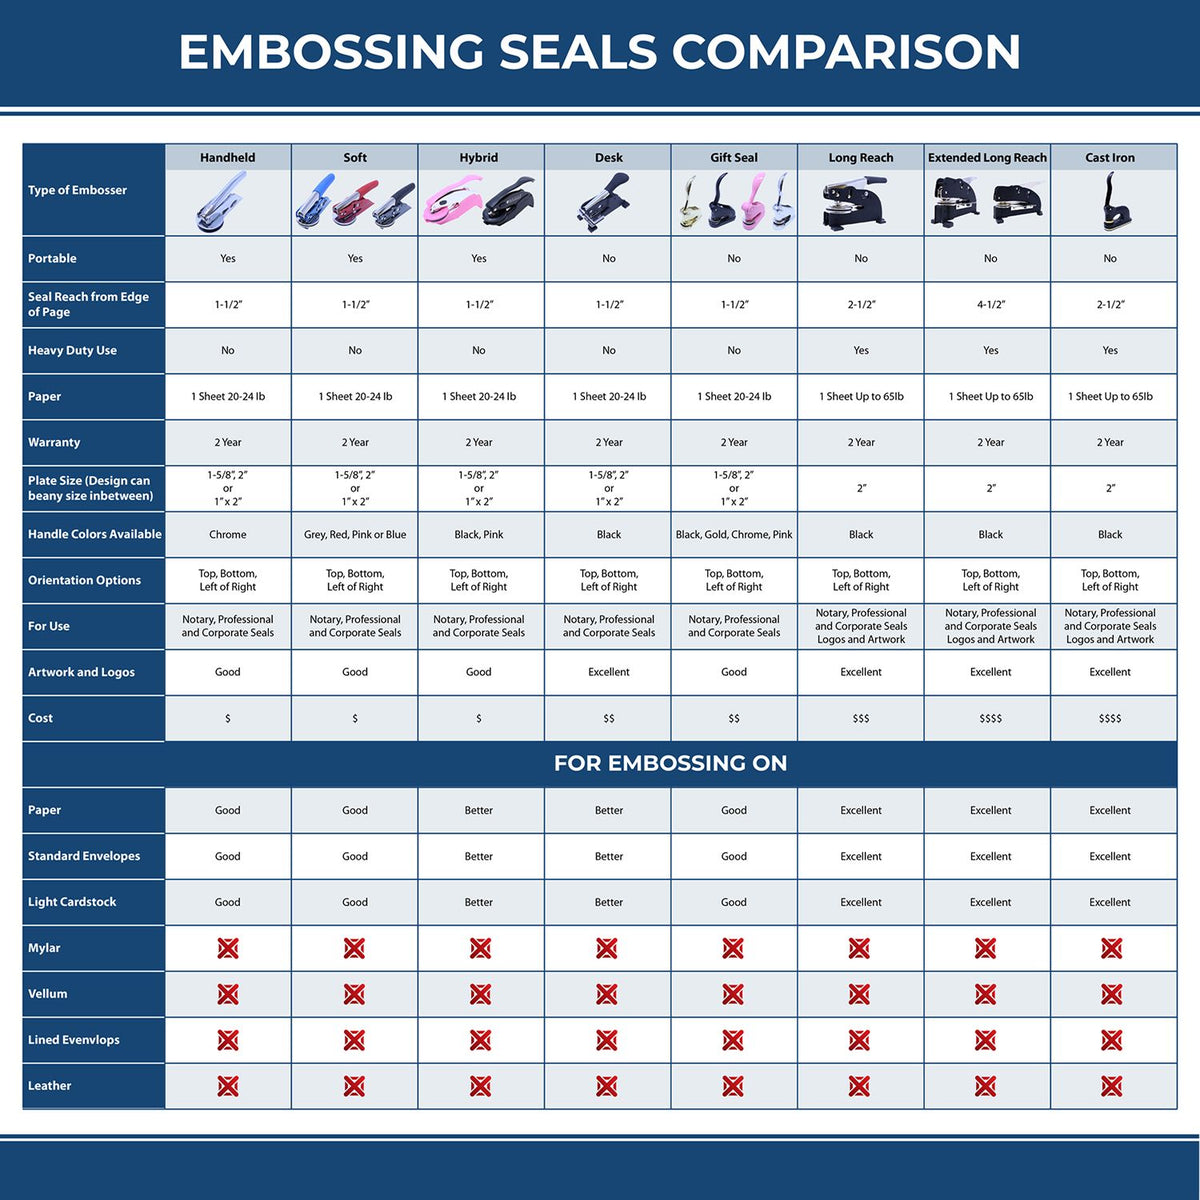 A comparison chart for the different types of mount models available for the Hybrid Missouri Engineer Seal